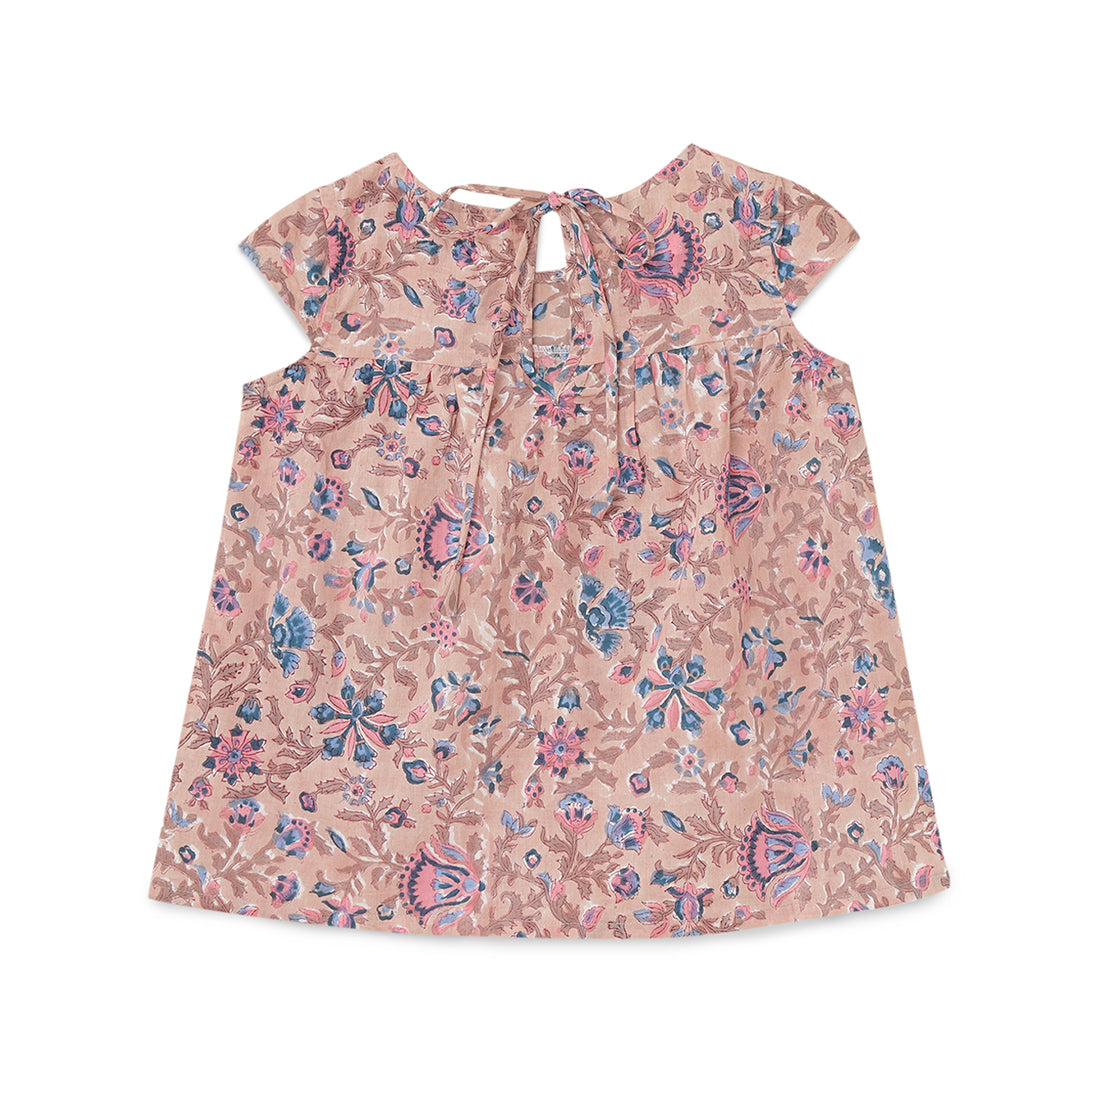 Girls Top and Shorts Set Light Brown with Green & Blue Print 2 yrs to 6 yrs - Back